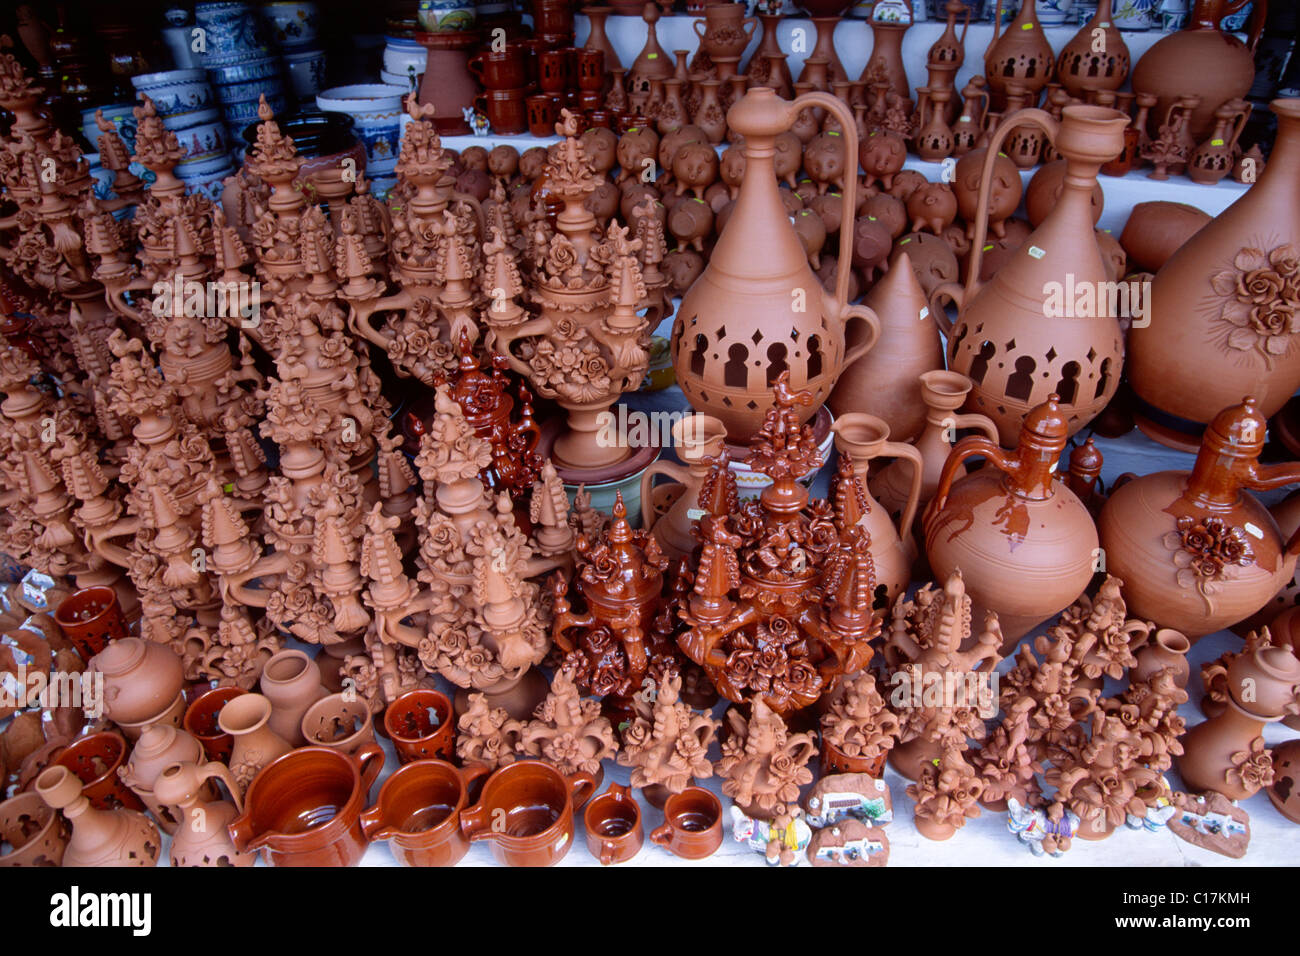 Souvenirs made of ceramic, Guadix, Andalusia, Spain, Europe Stock Photo